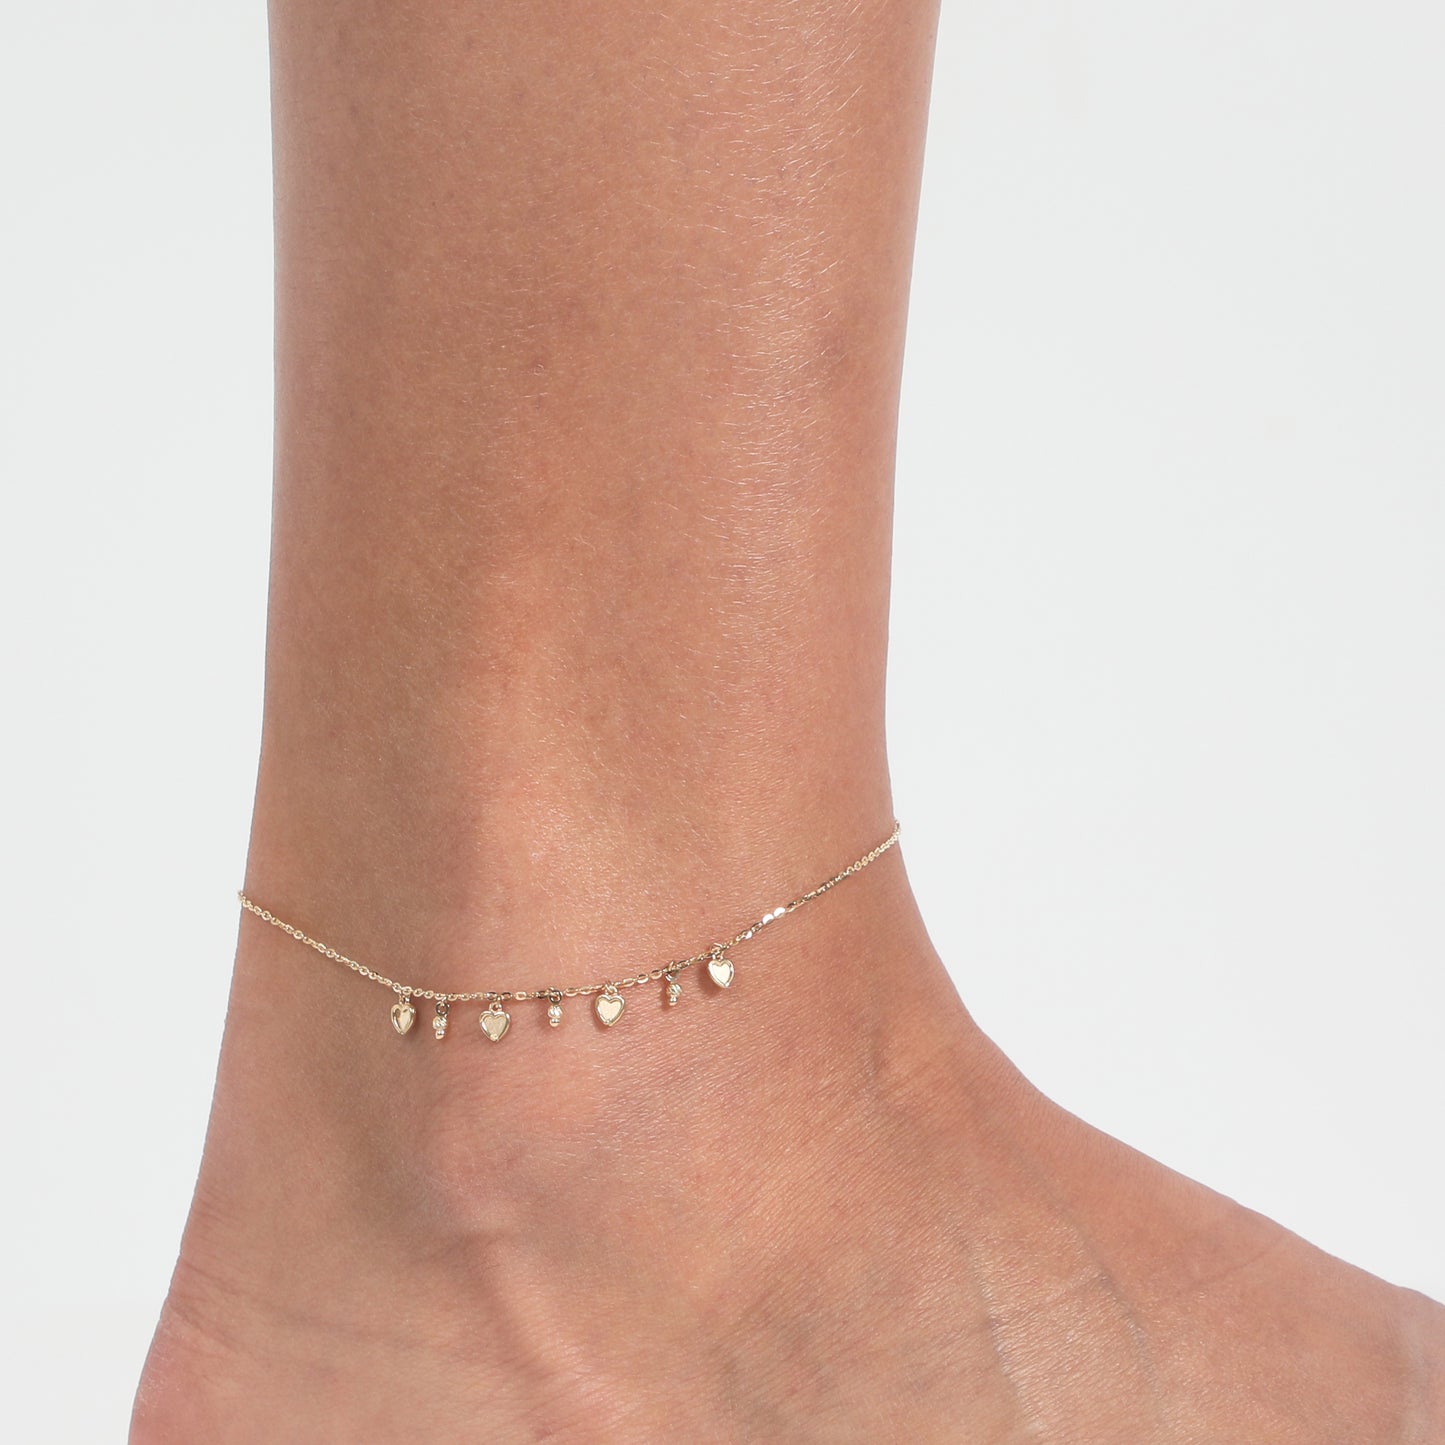 MICRO HEARTS ANKLET